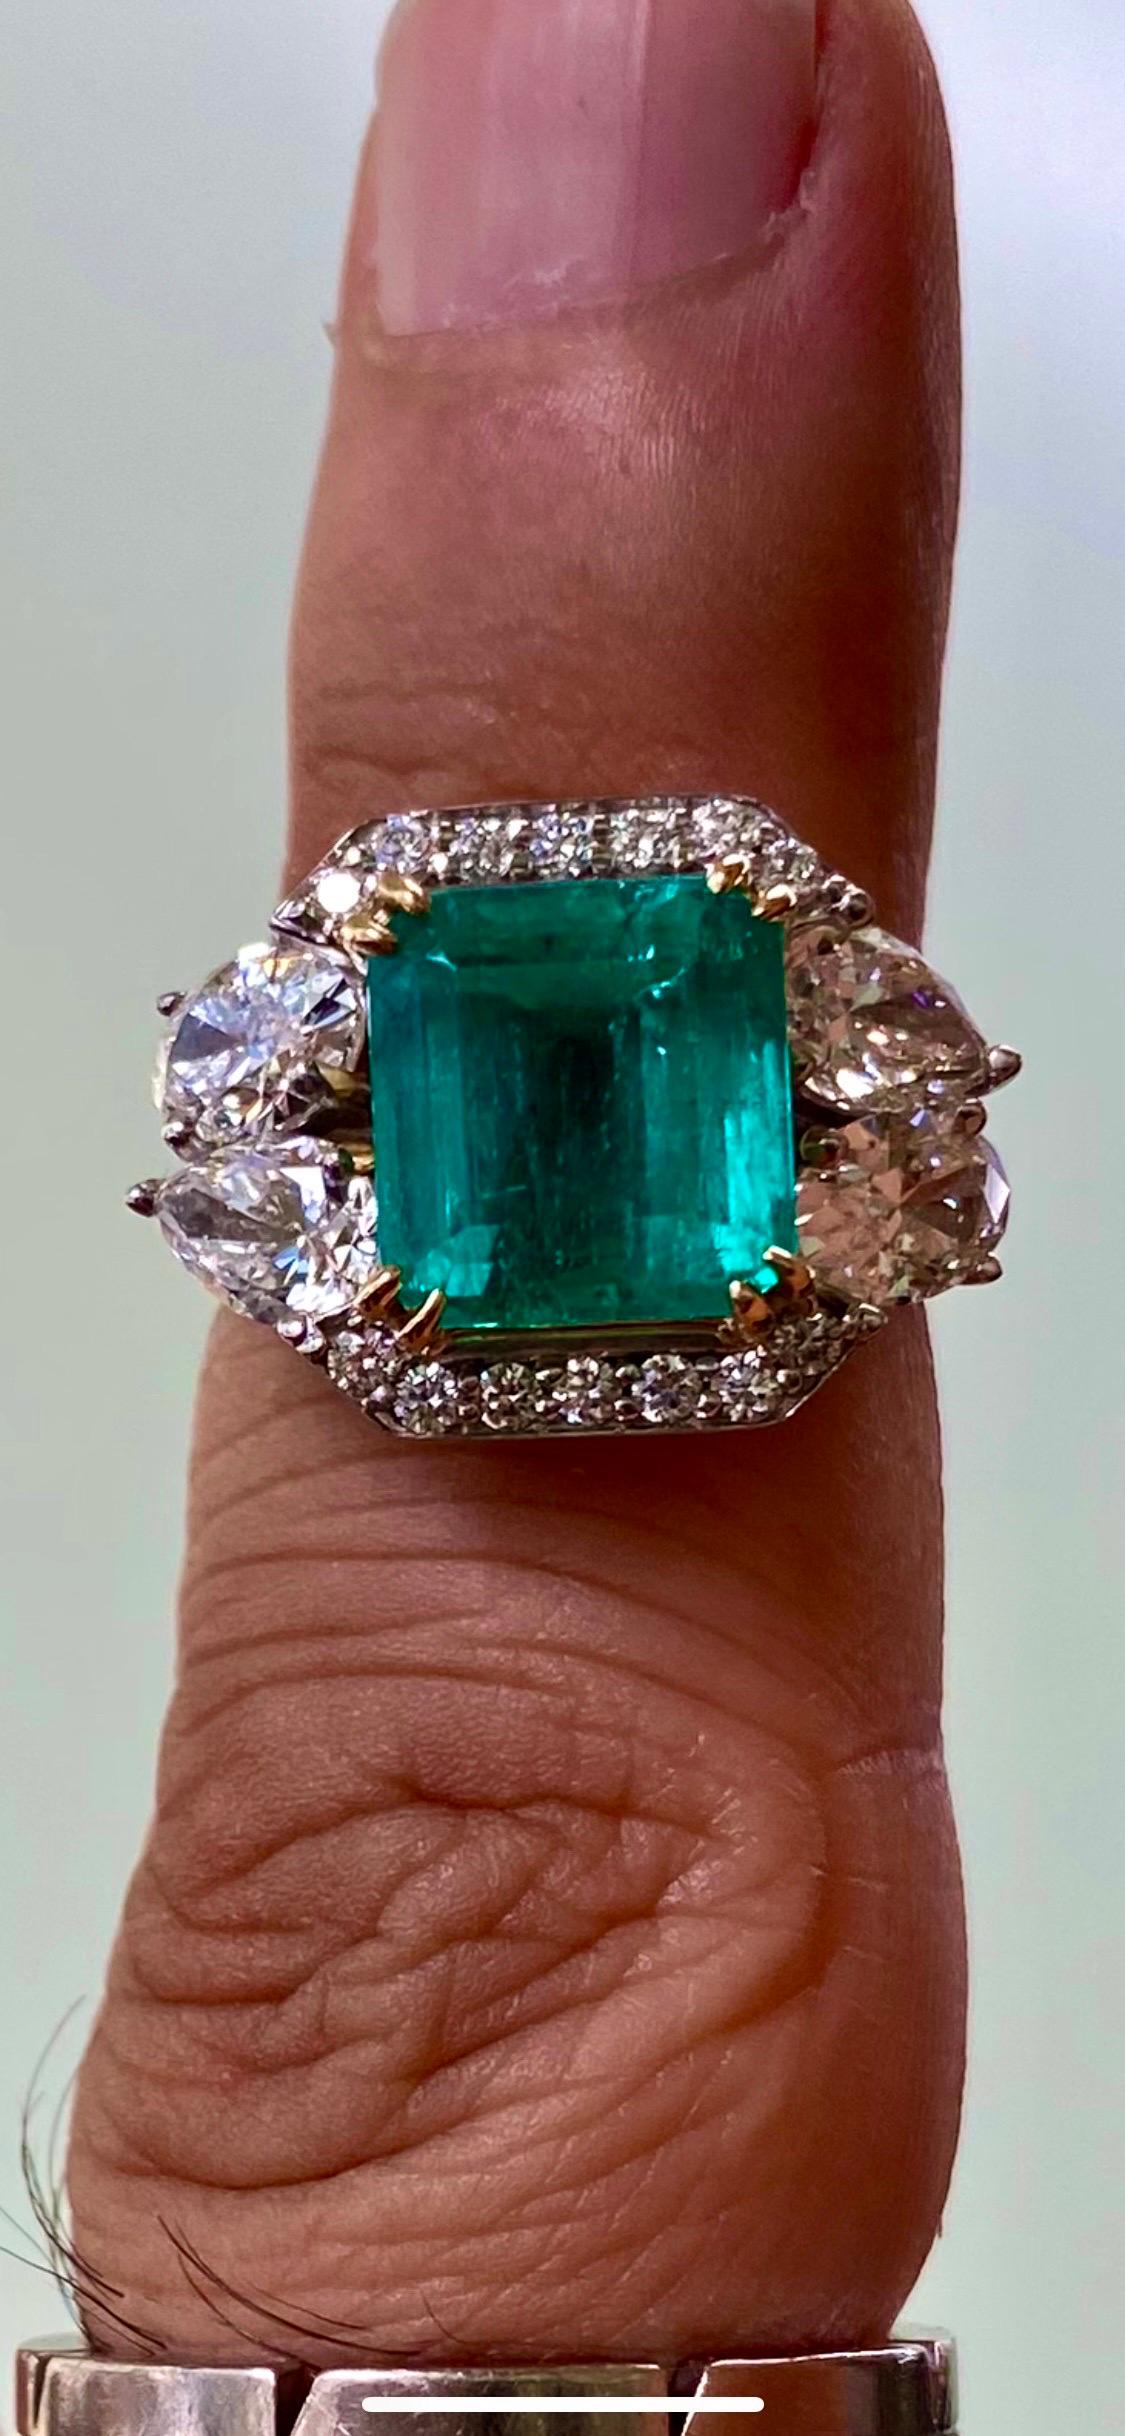 Dekara Designs Collection

Metal- 18K White Gold, 18K Yellow Gold, .750.

Stones- GIA Certified Colombian Emerald 4.87 Carats, GIA Certified Pear Shape Diamond H Color VVS1 Clarity 0.52 Carats, GIA Certified Pear Shape Diamond J Color VS2 Clarity